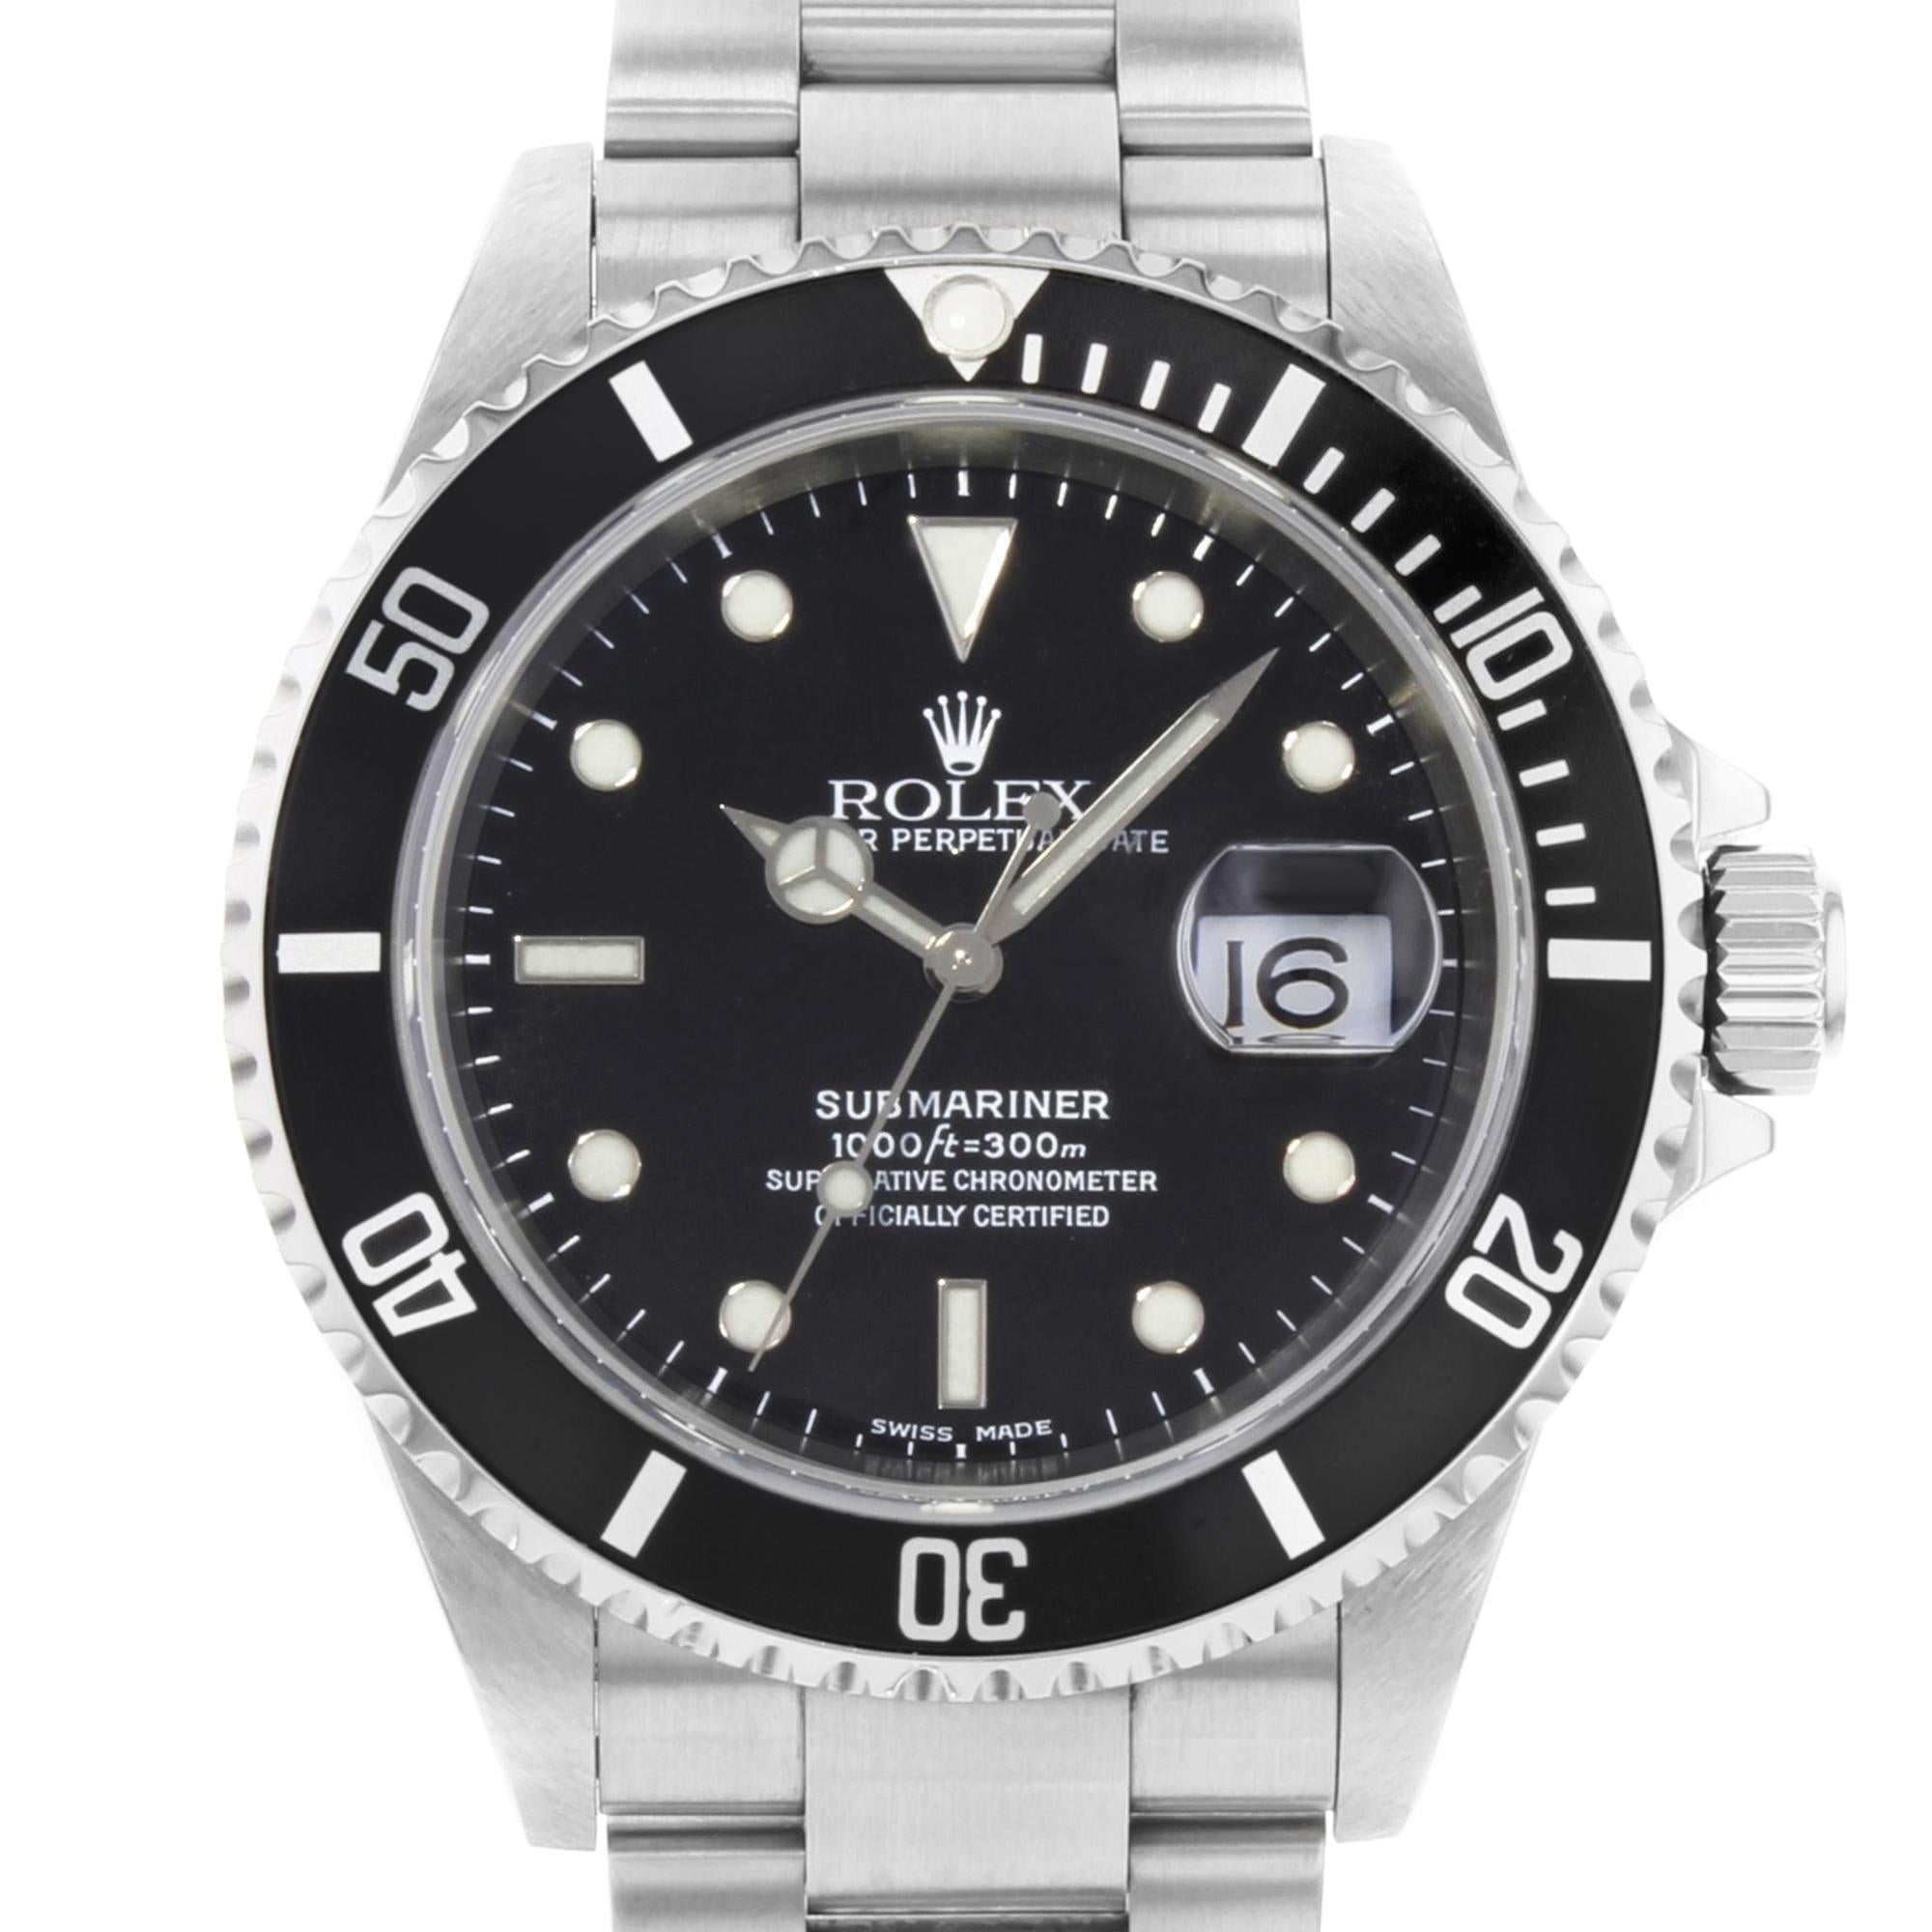 Rolex Submariner 16610 Holes 4-Liner Date 2000 Steel Automatic Mens Watch